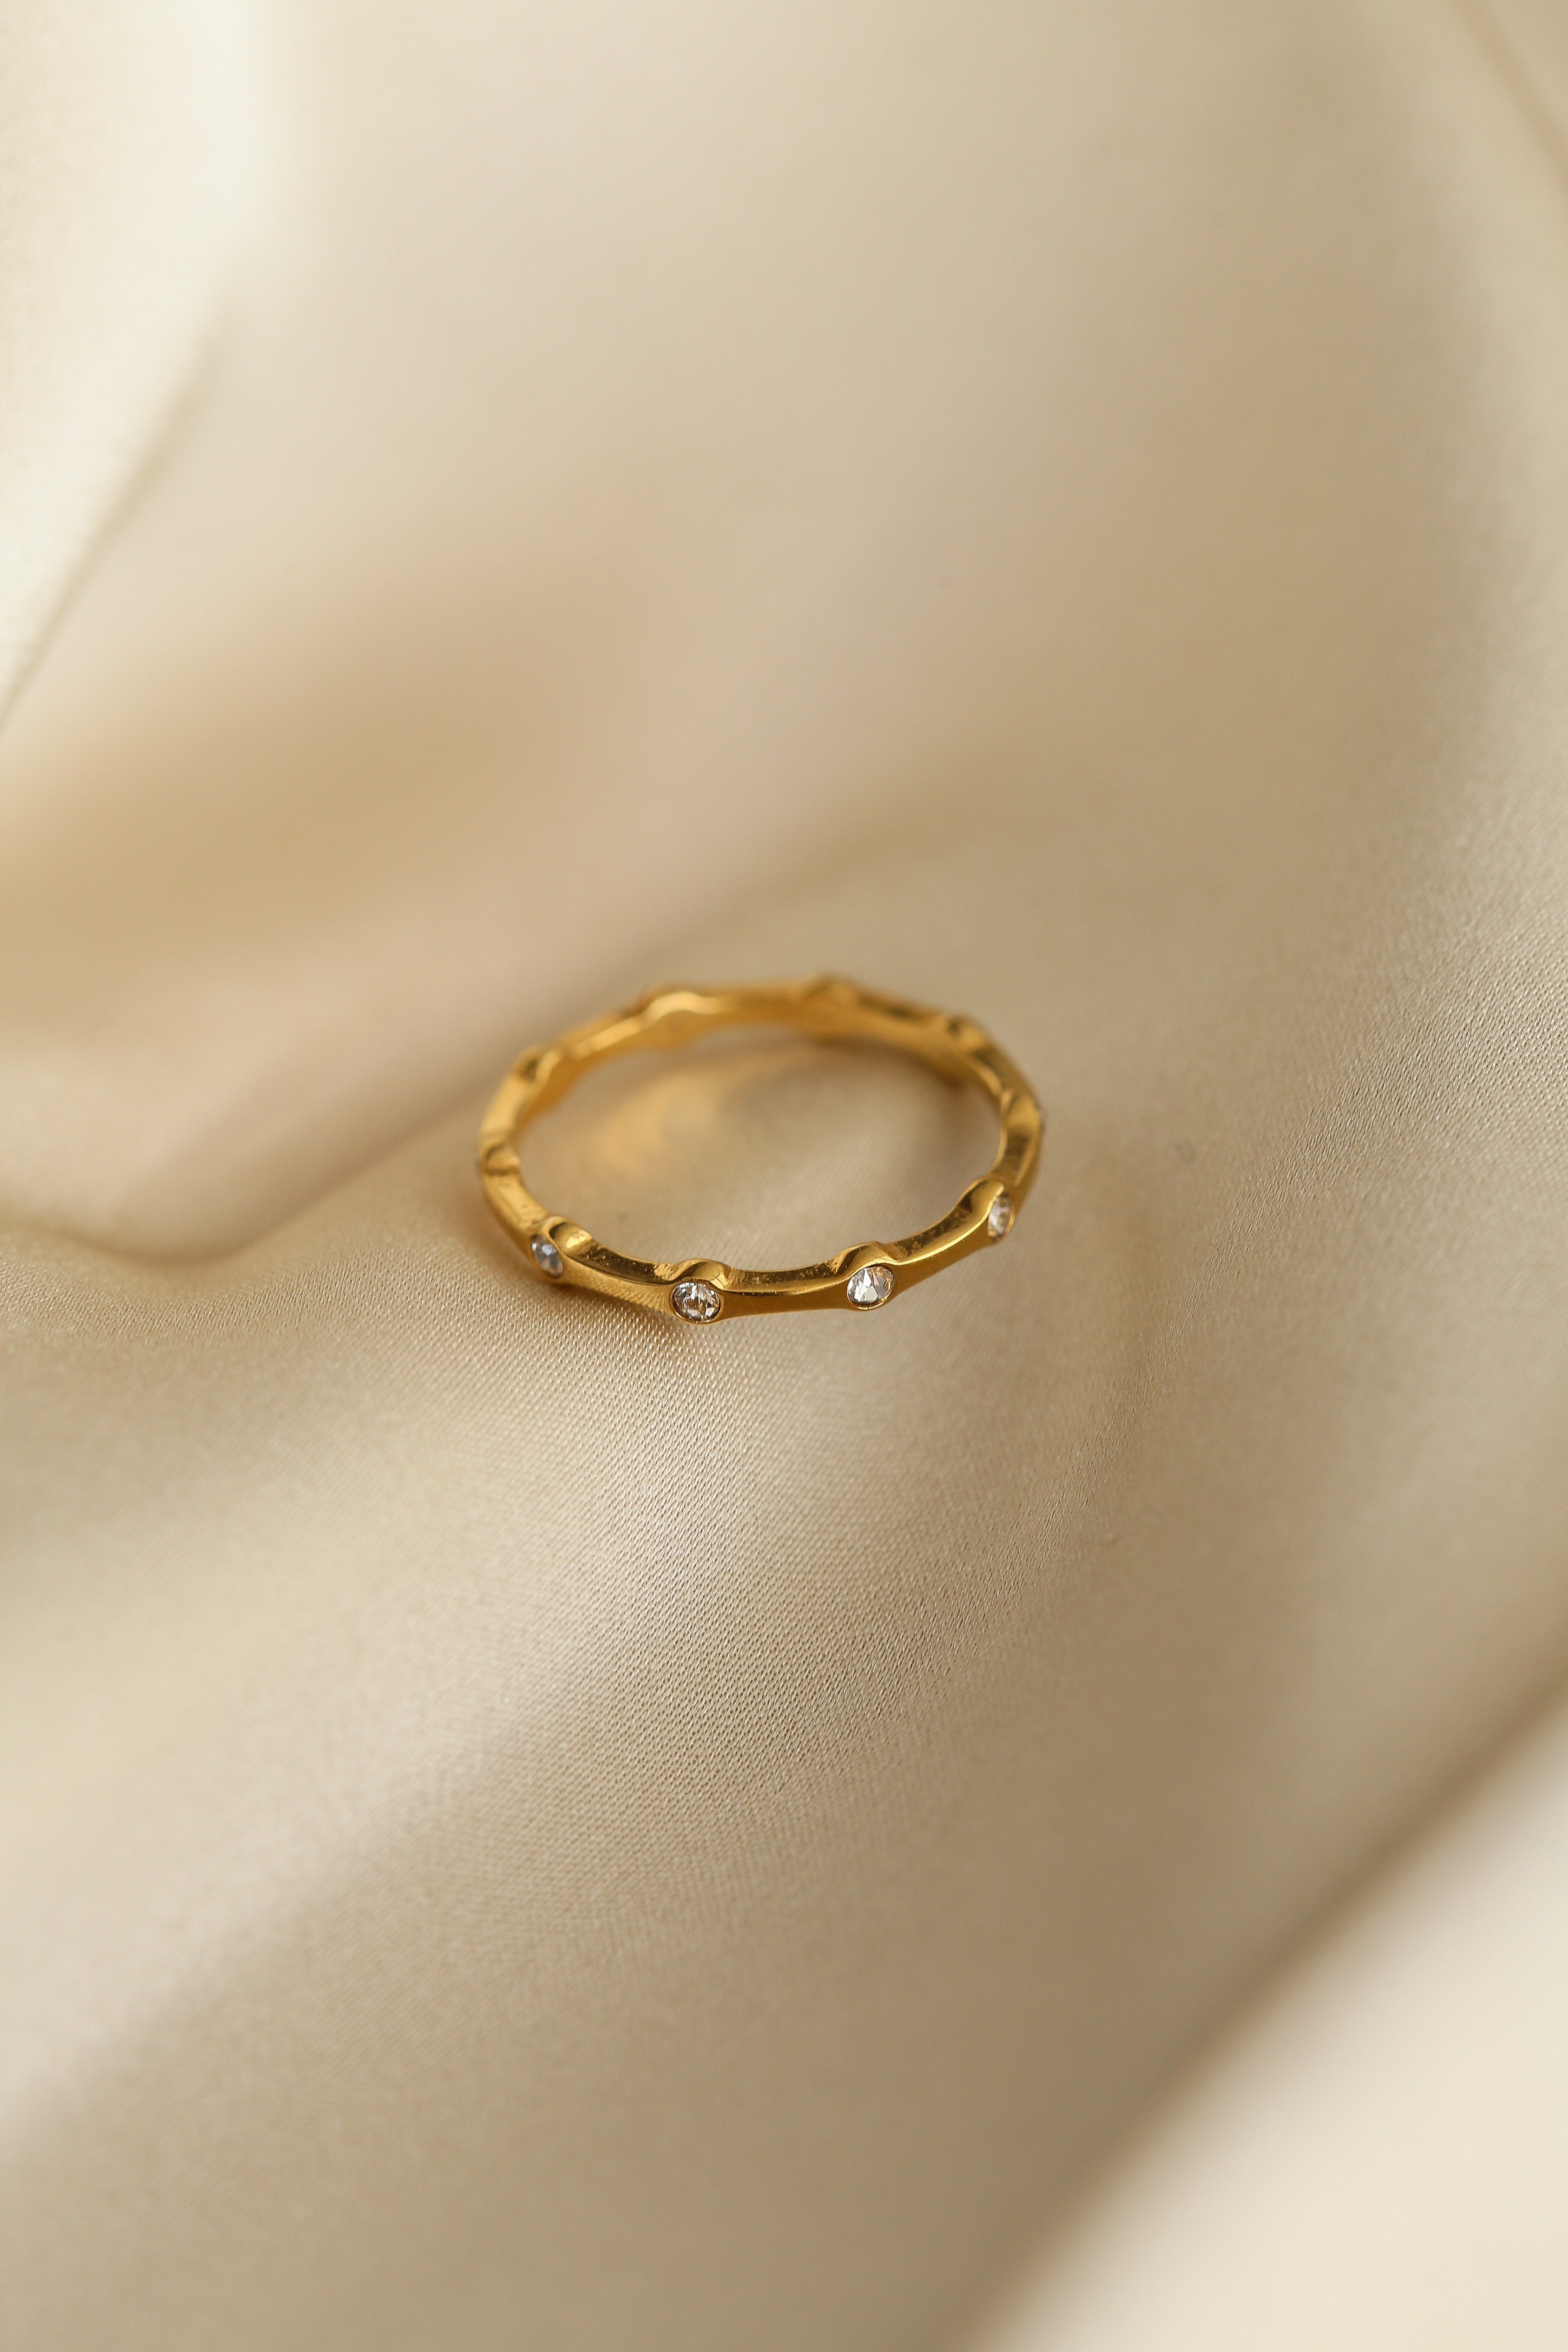 Henrietta Ring - Boutique Minimaliste has waterproof, durable, elegant and vintage inspired jewelry